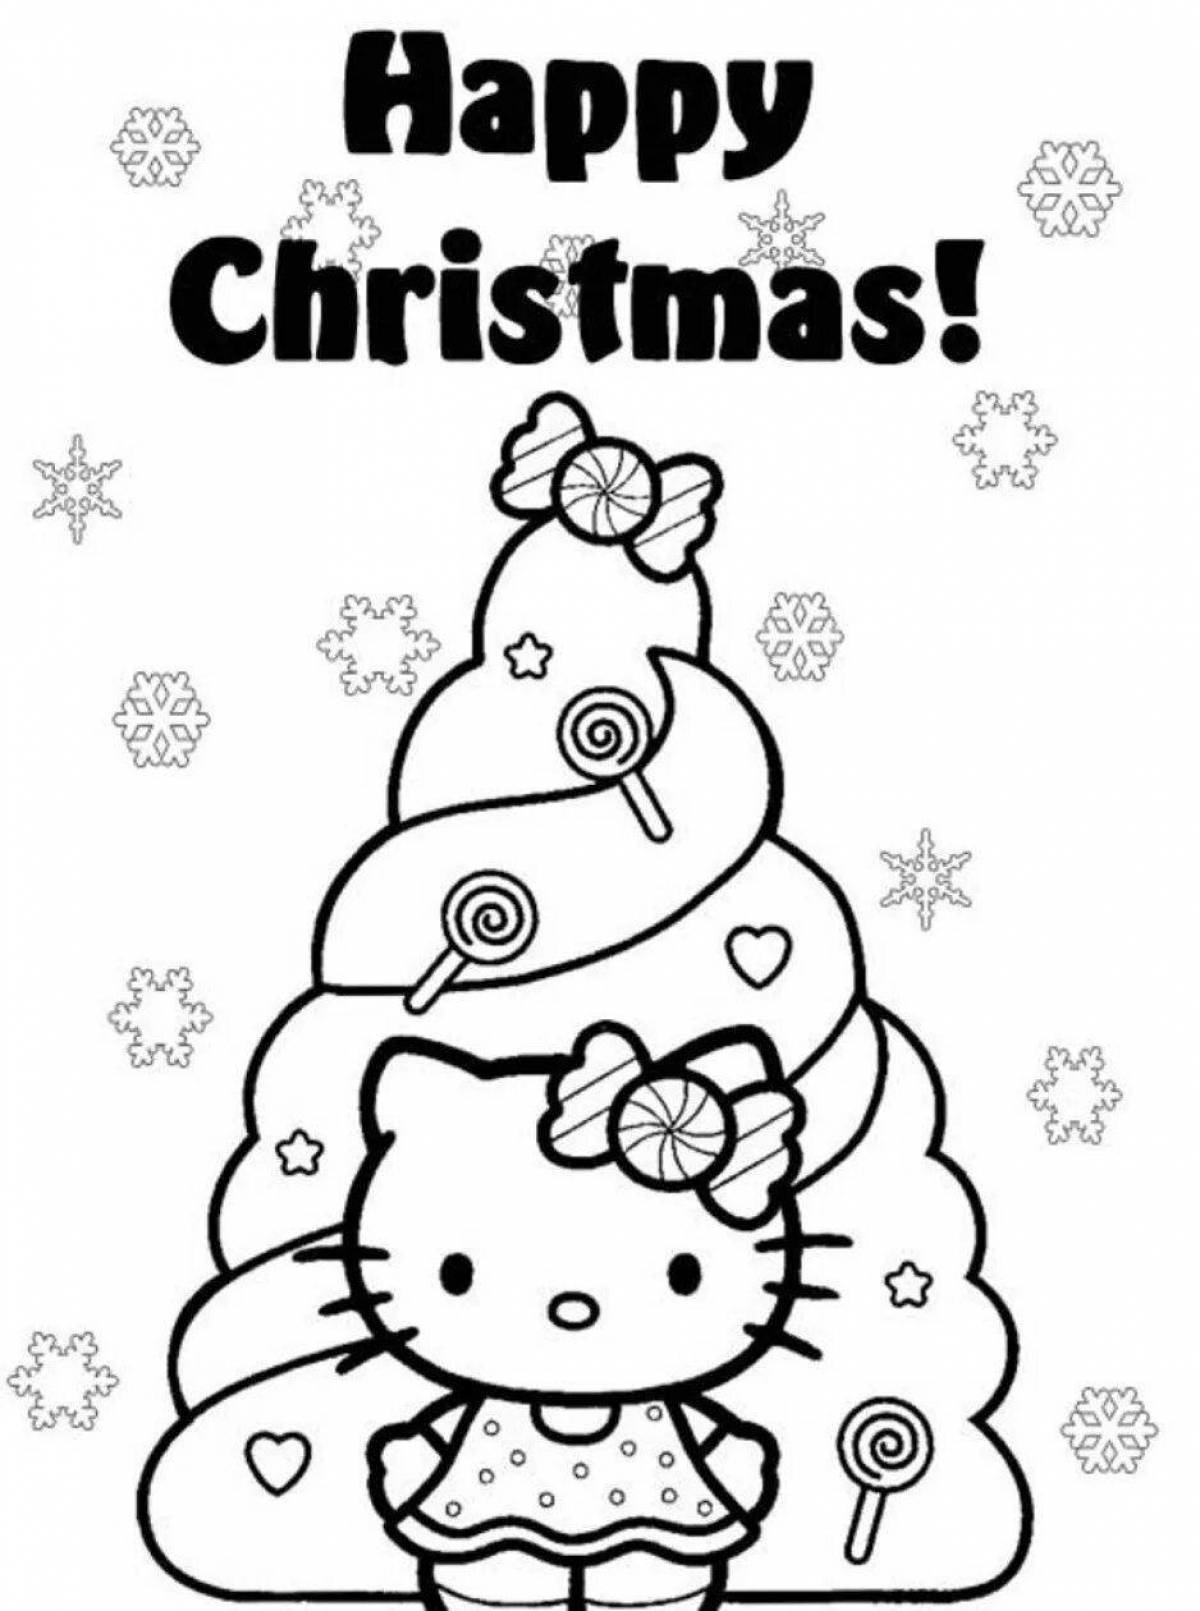 Kitty's dazzling Christmas coloring book